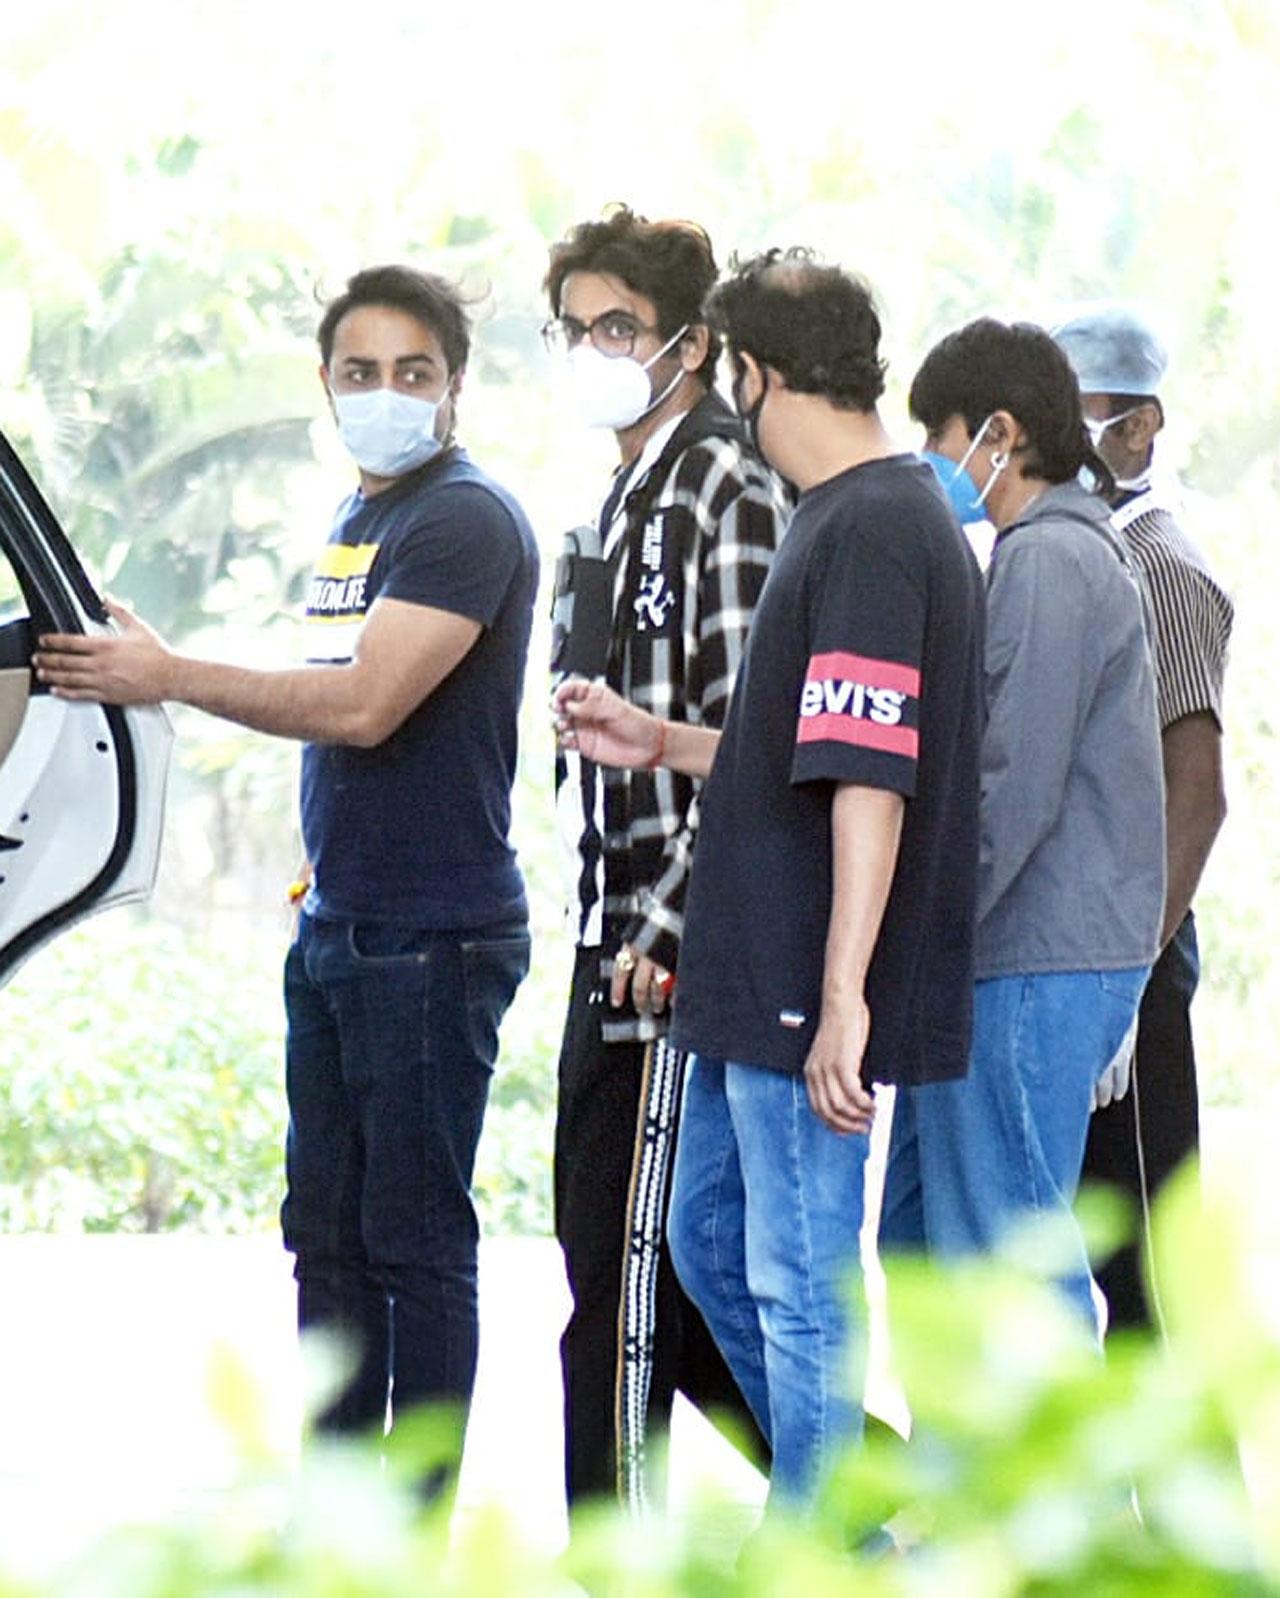 Sunil Grover is now going to be back home after undergoing a heart surgery. The actor was accompanied by his team as he exited from the hospital and before driving back home, he showed a heart sign to the media. It seems he was thanking them for their support and wishes.